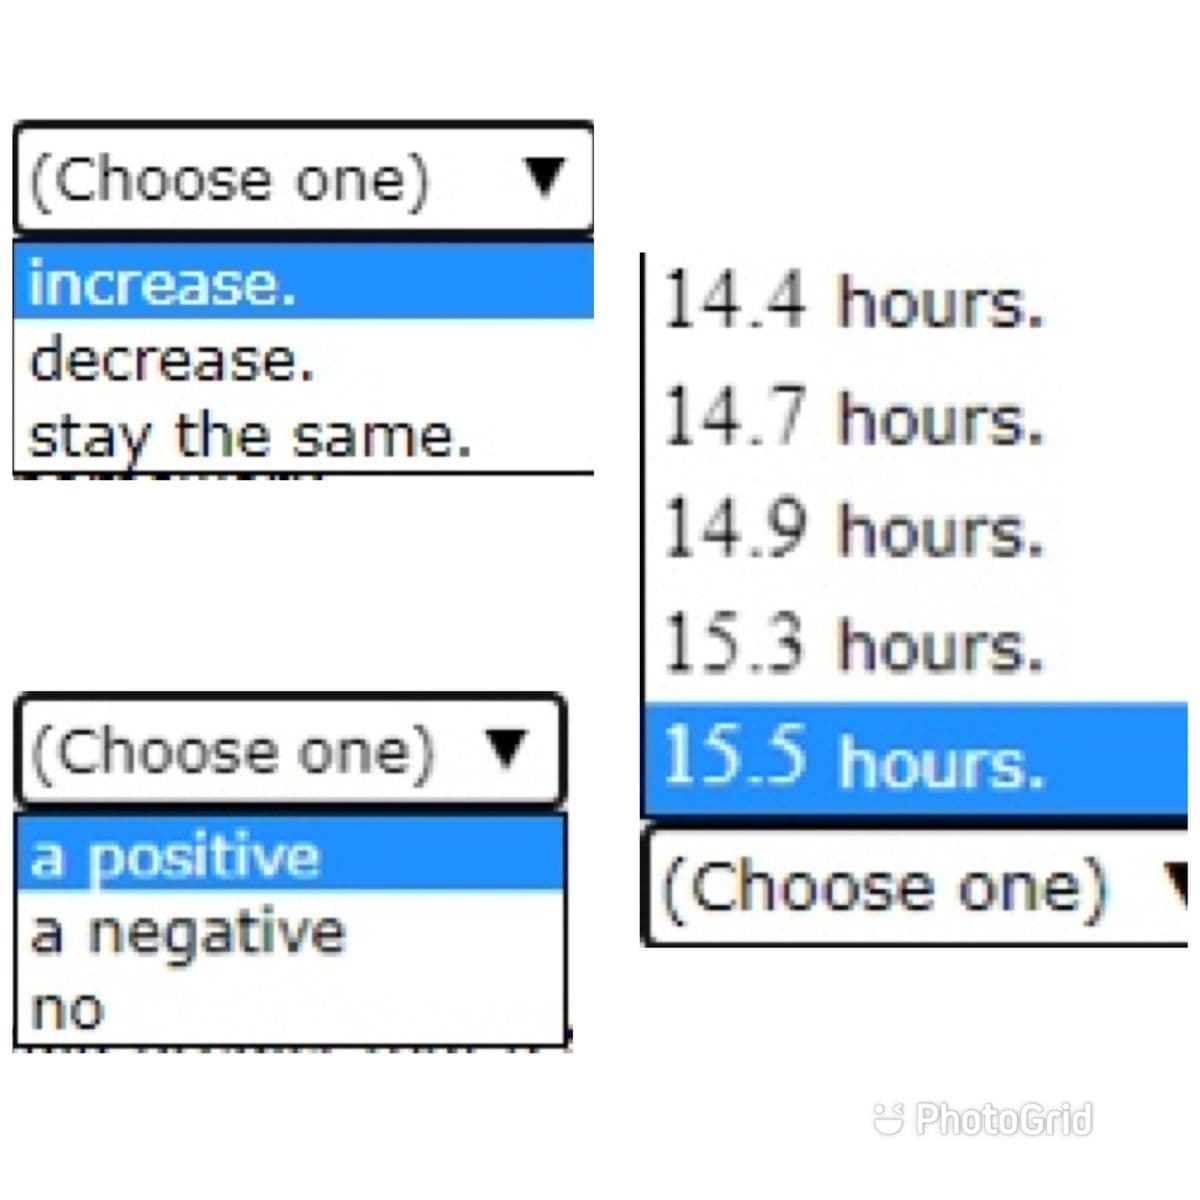 (Choose one)
increase.
decrease.
stay the same.
(Choose one)
a positive
a negative
no
▼
14.4 hours.
14.7 hours.
14.9 hours.
15.3 hours.
15.5 hours.
(Choose one)
PhotoGrid